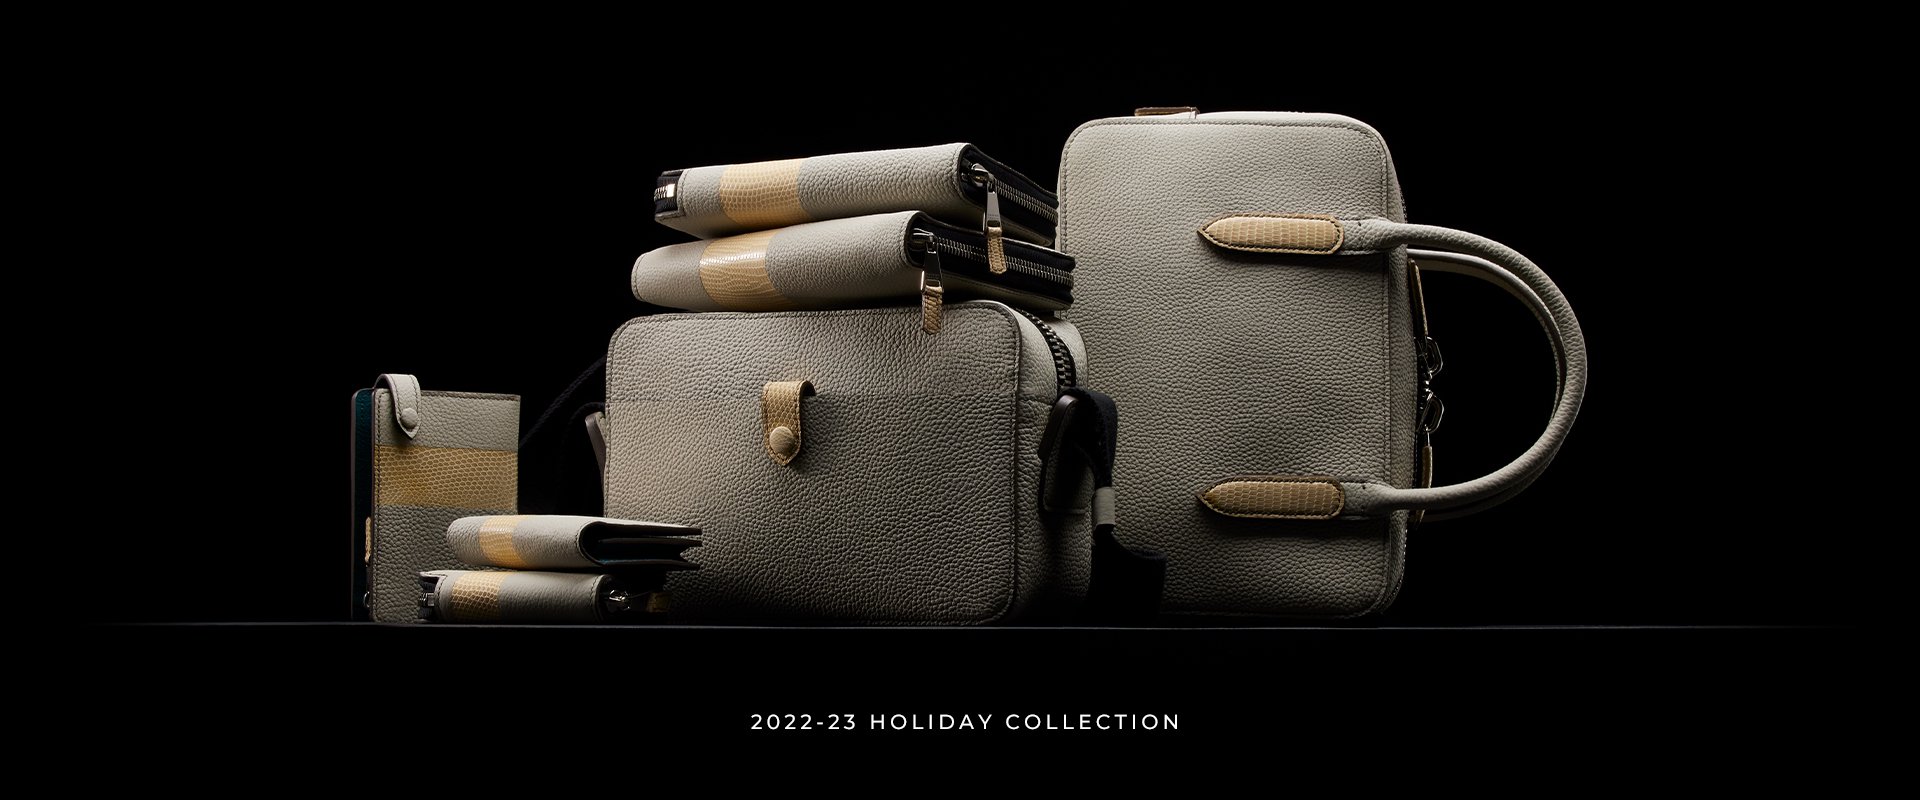 2022-2023 HOLIDAY COLLECTION